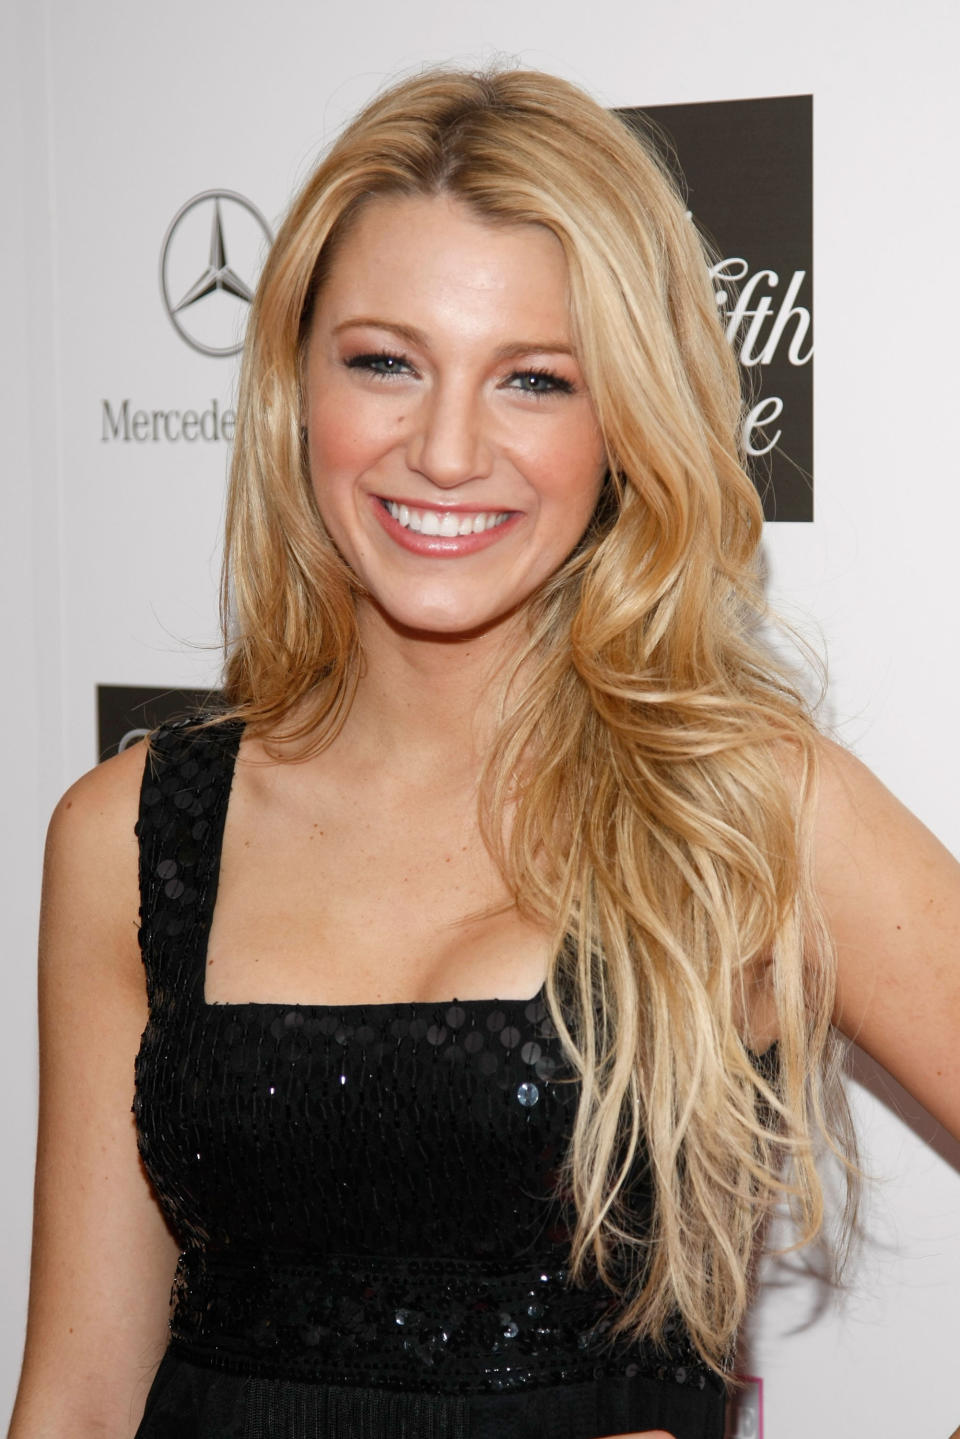 NEW YORK - OCTOBER 17:  Actress Blake Lively on the Red carpet at the 'VIVA LA CURE'  Benefiting for  EIF's Women's Cancer Research Fund hosted by SAKS Fifth Avenue at The Sea Grill Restaurant at Rockefeller Center on October 17, 2007 in New York City  (Photo by Jemal Countess/WireImage) 